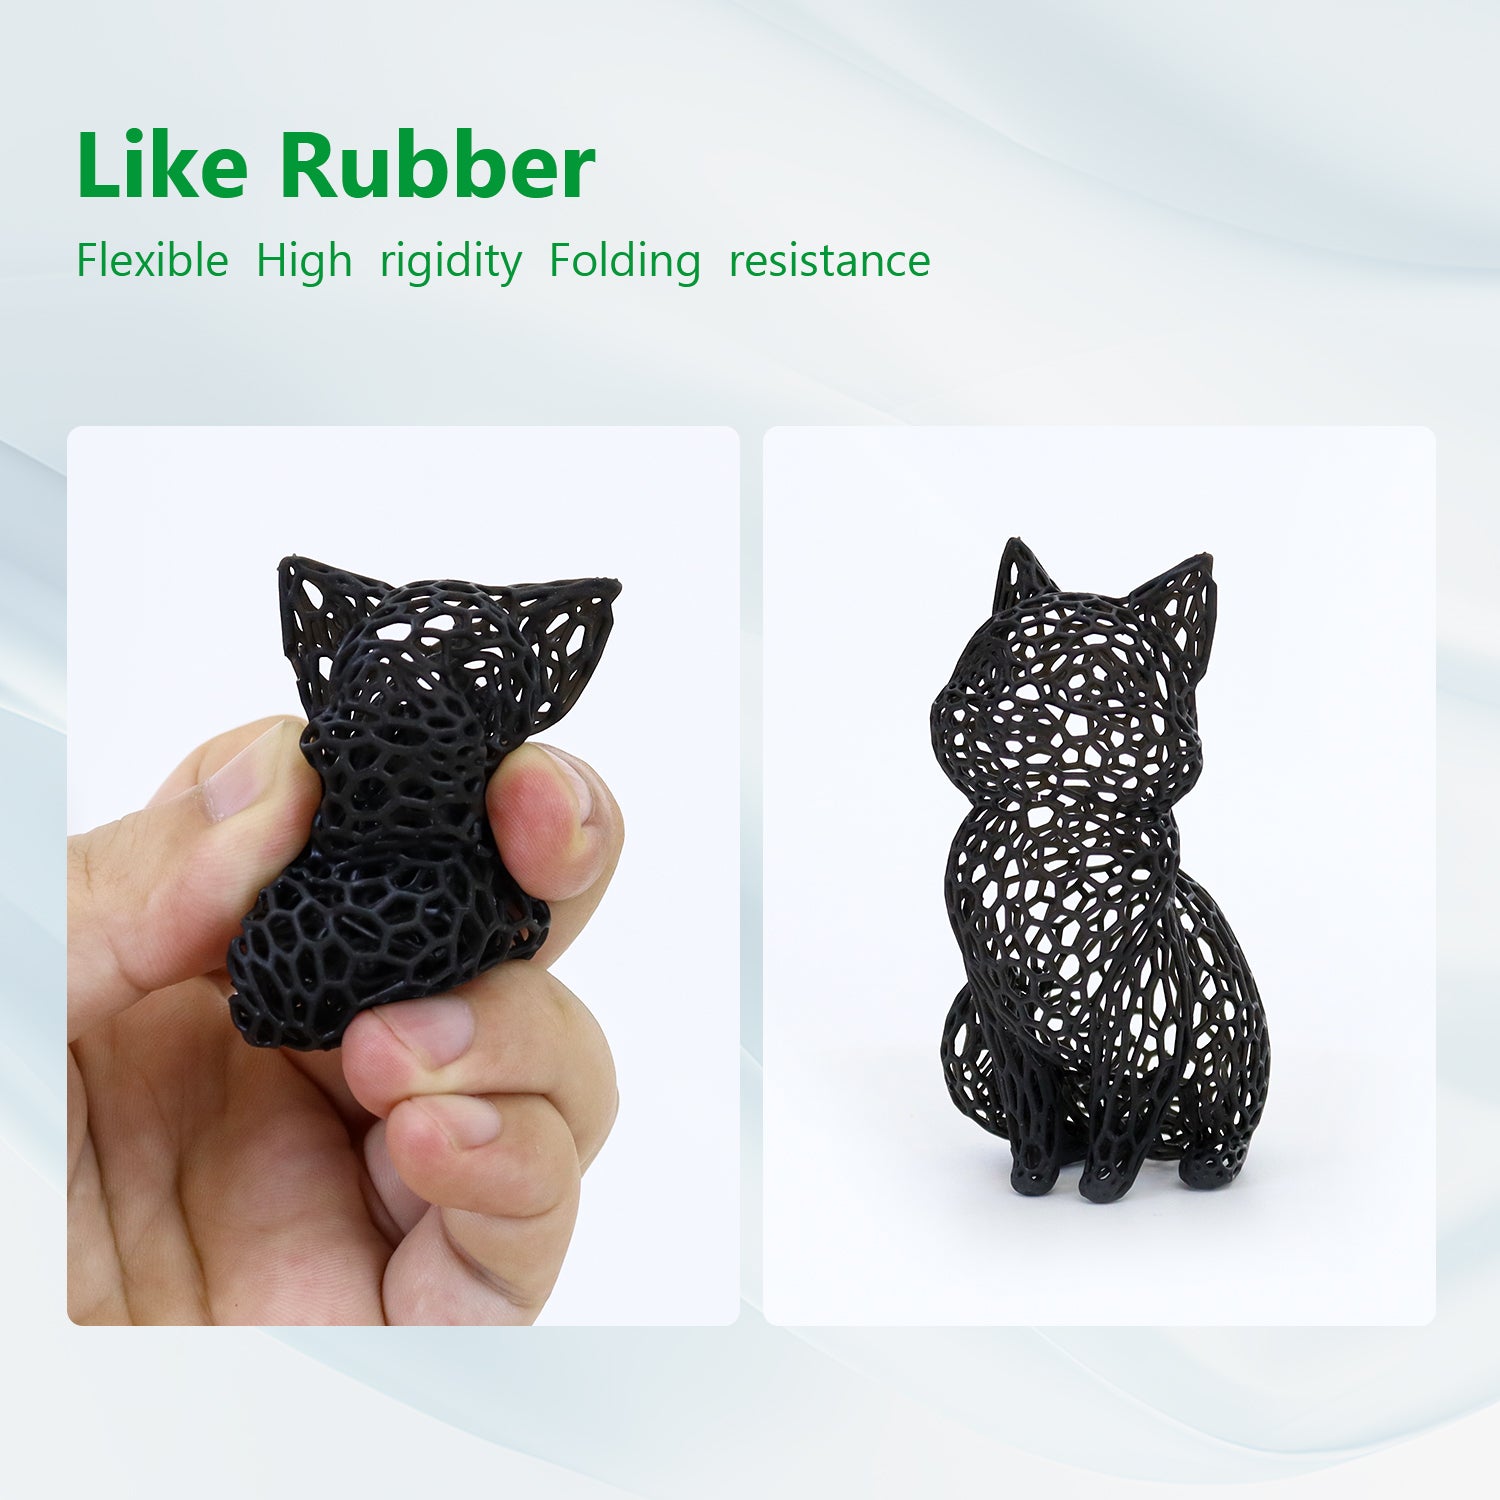 Resin Family: Flexible and Elastic